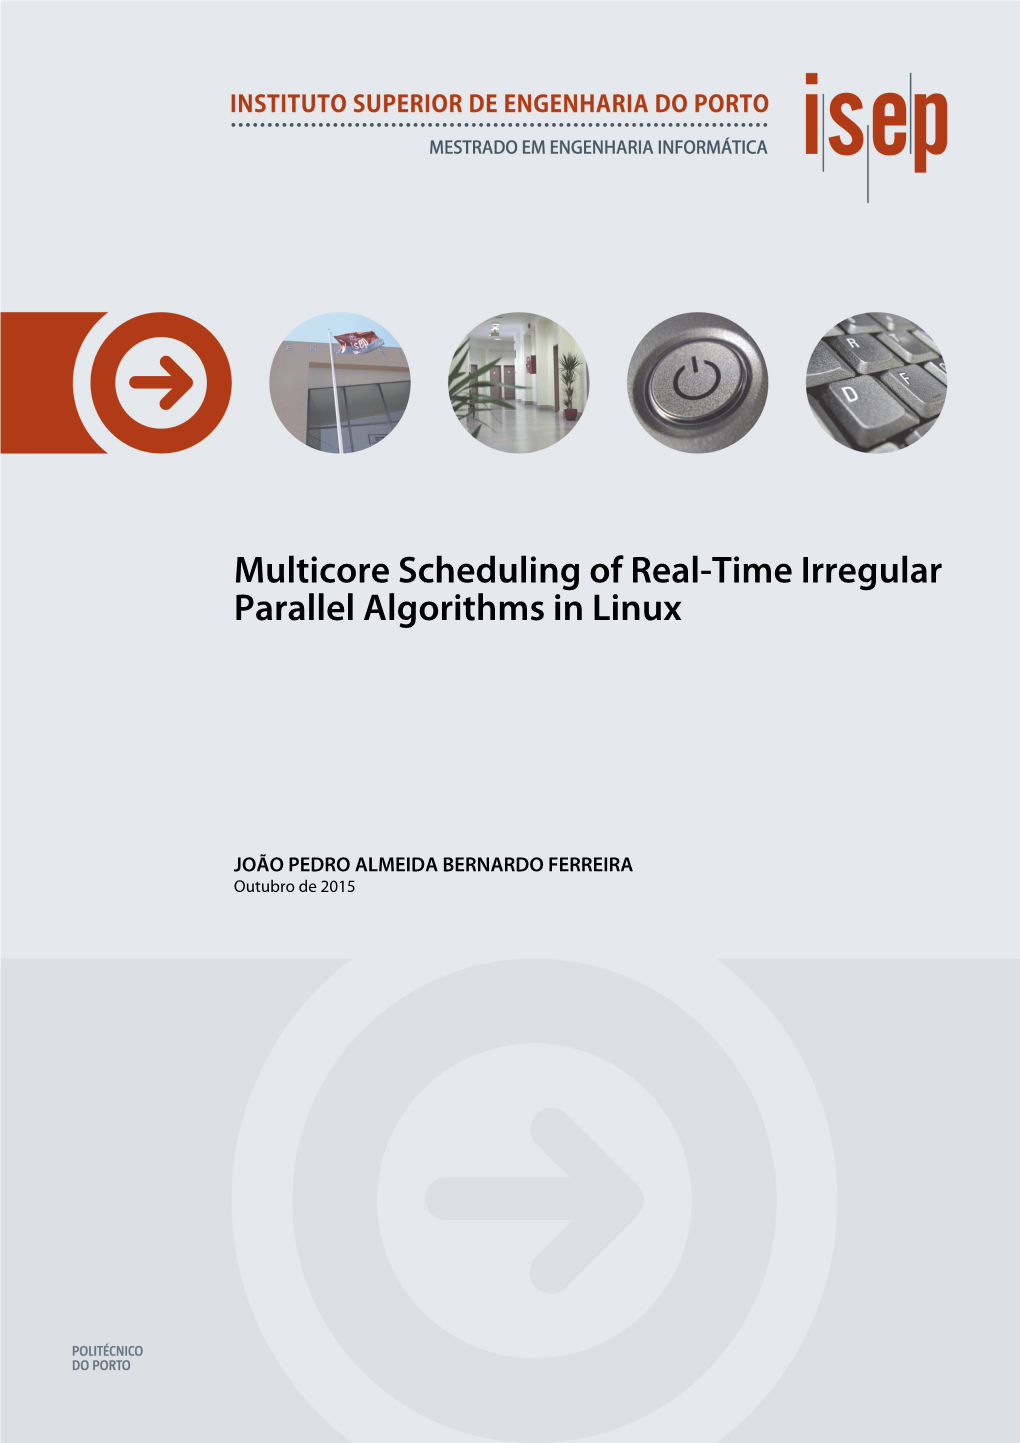 Multicore Scheduling of Real-Time Irregular Parallel Algorithms in Linux